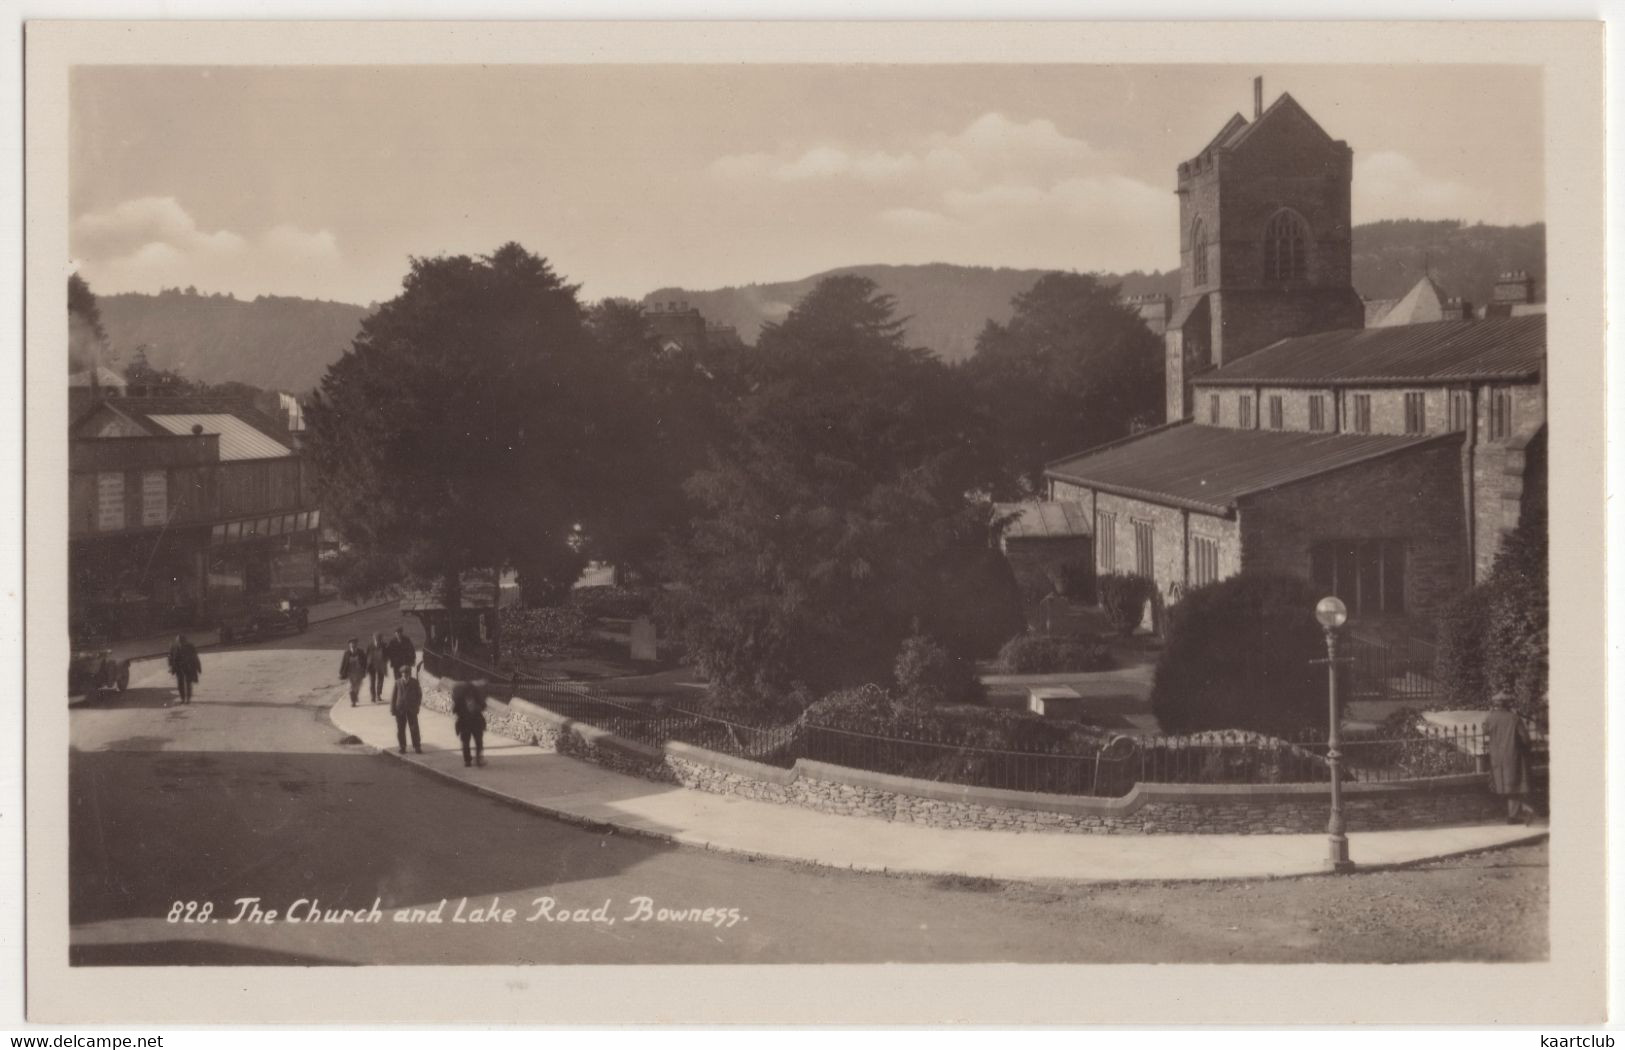 828. The Church And Lake Road, Bowness. - (England, U.K.) - Windermere